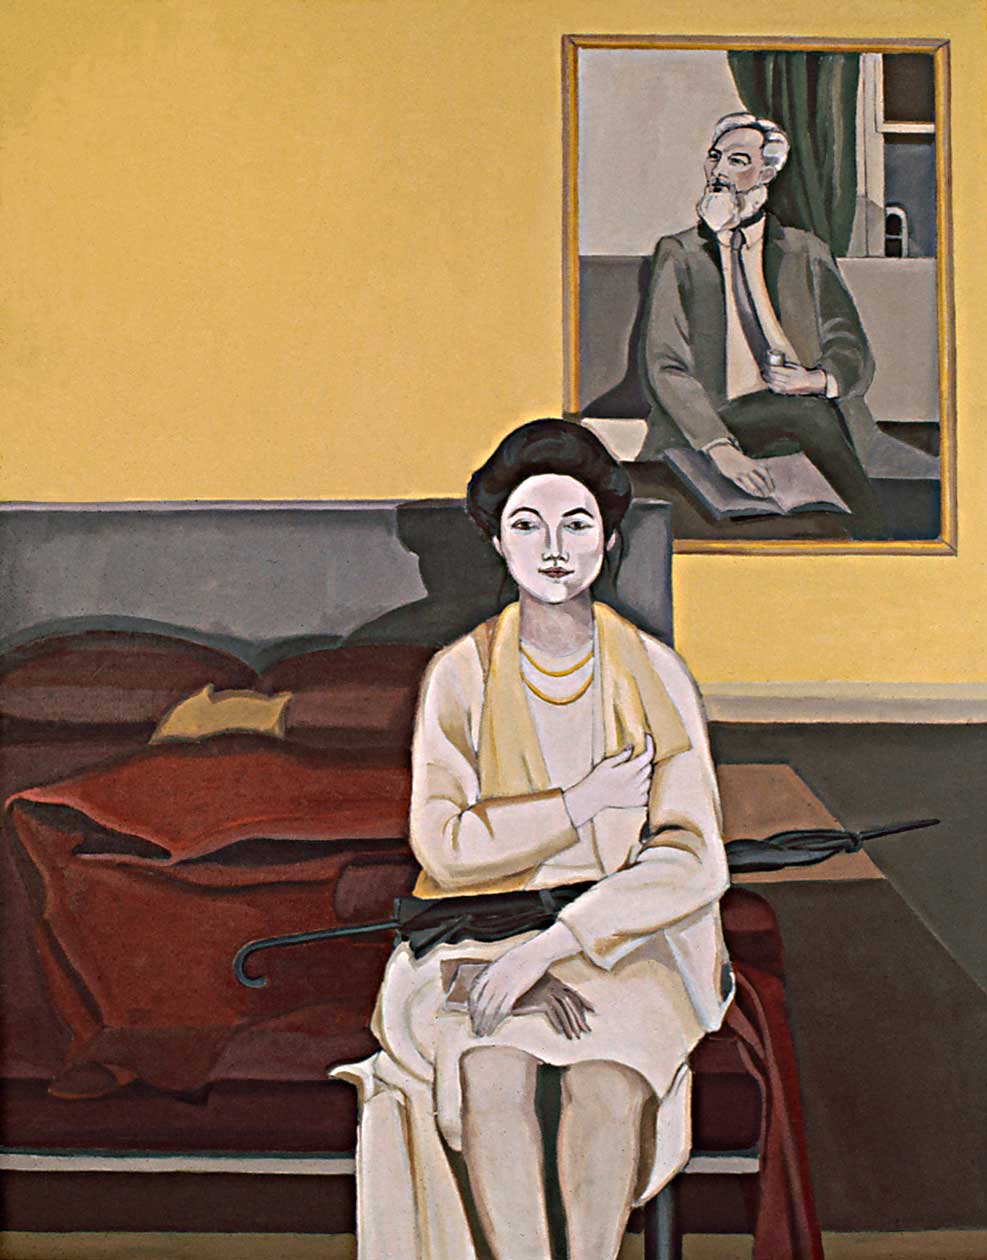 Thumbnail of Alice Baber and Paul Jenkins by Ethel Fisher, 1967, oil on canvas, 51 x 40 inches, twentieth century figure painting.